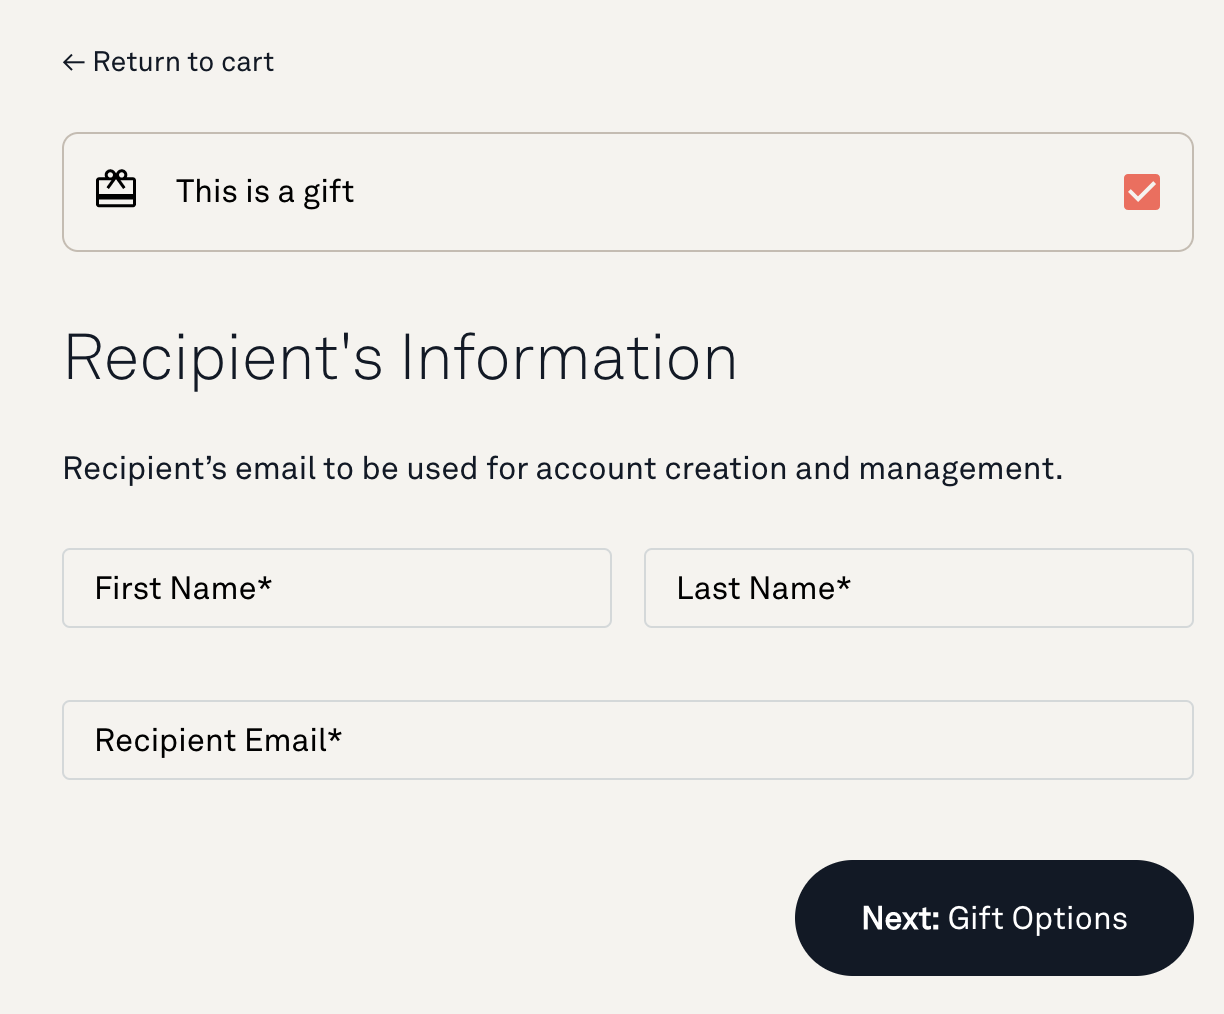 recipient's information screen when this is a gift is selected